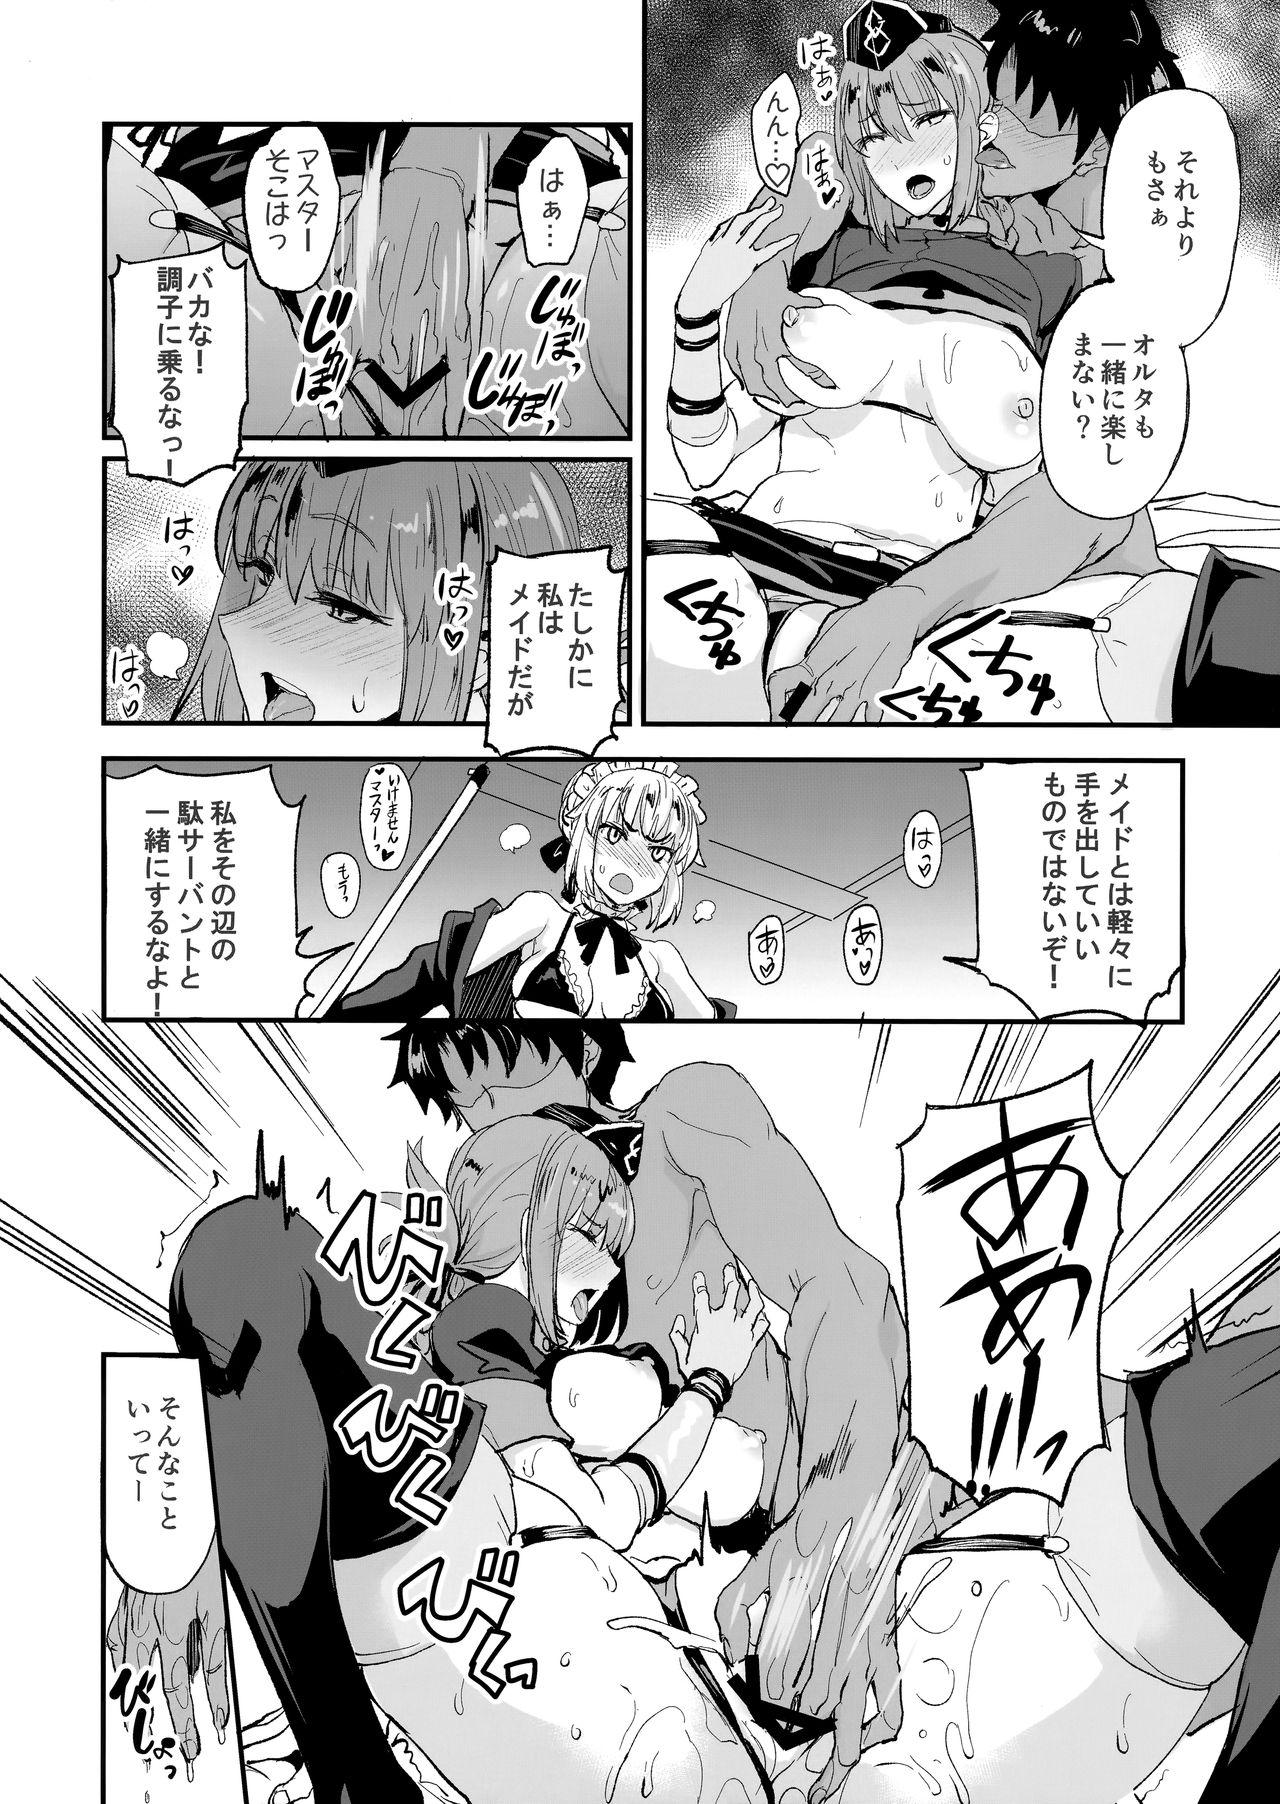 Atm FGO no Erohon 2 - Fate grand order Hairy Pussy - Page 11